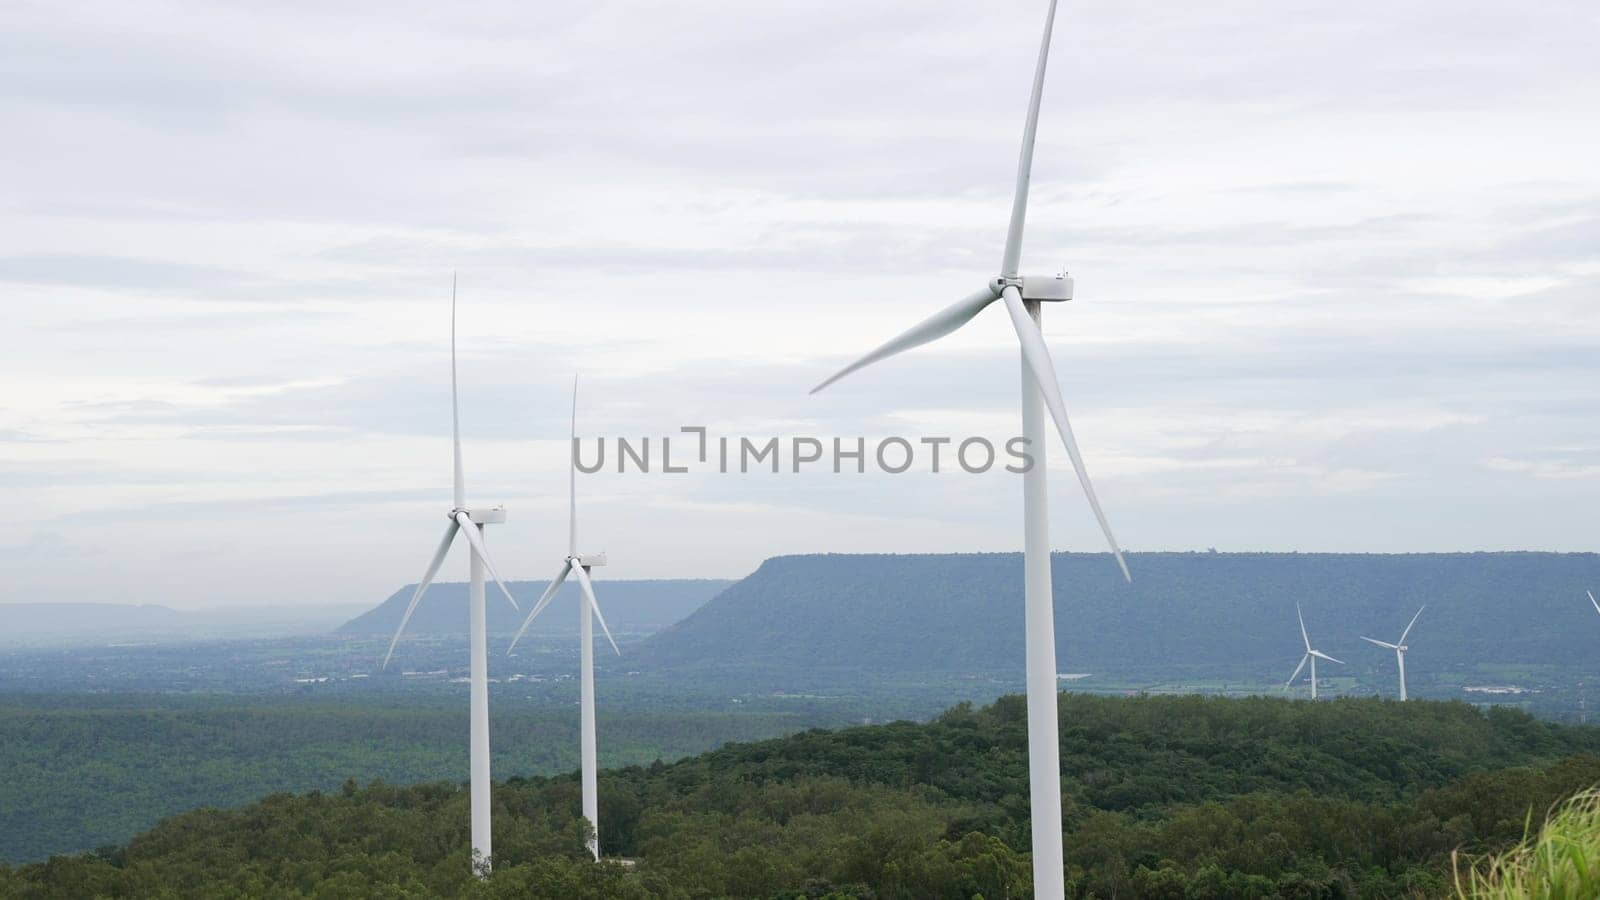 Progressive way of utilizing wind as renewable source of energy to power the modern way of life by wind turbine farm on green field or hill. Windmill generator generate electric with no CO2 emission.